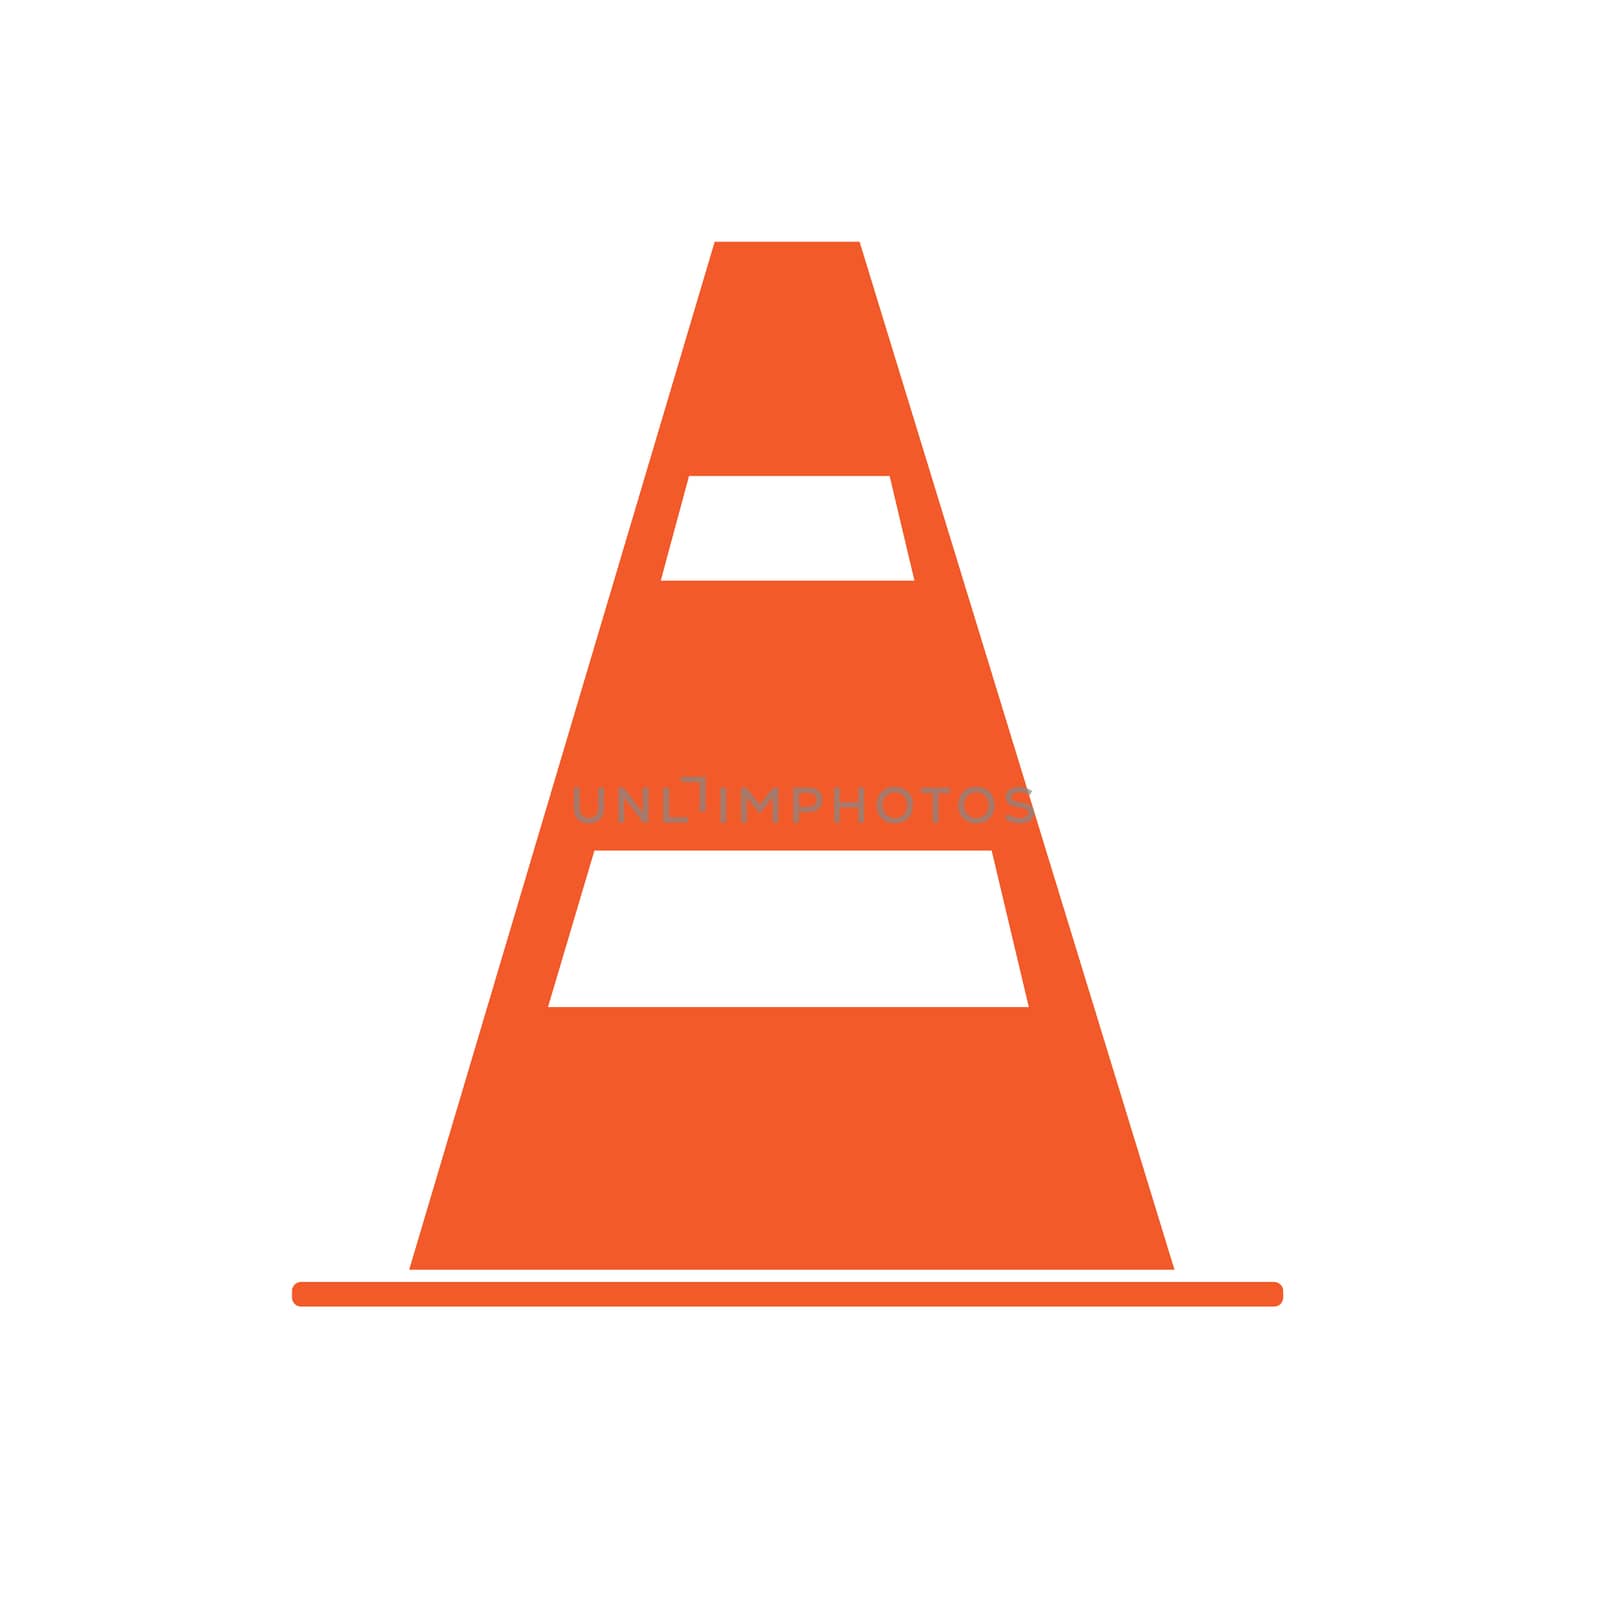 construction barrier icon on white background. construction barrier sign. flat style. traffic cone icon for your web site design, logo, app, UI. street warning symbol. road cone barrier sign.